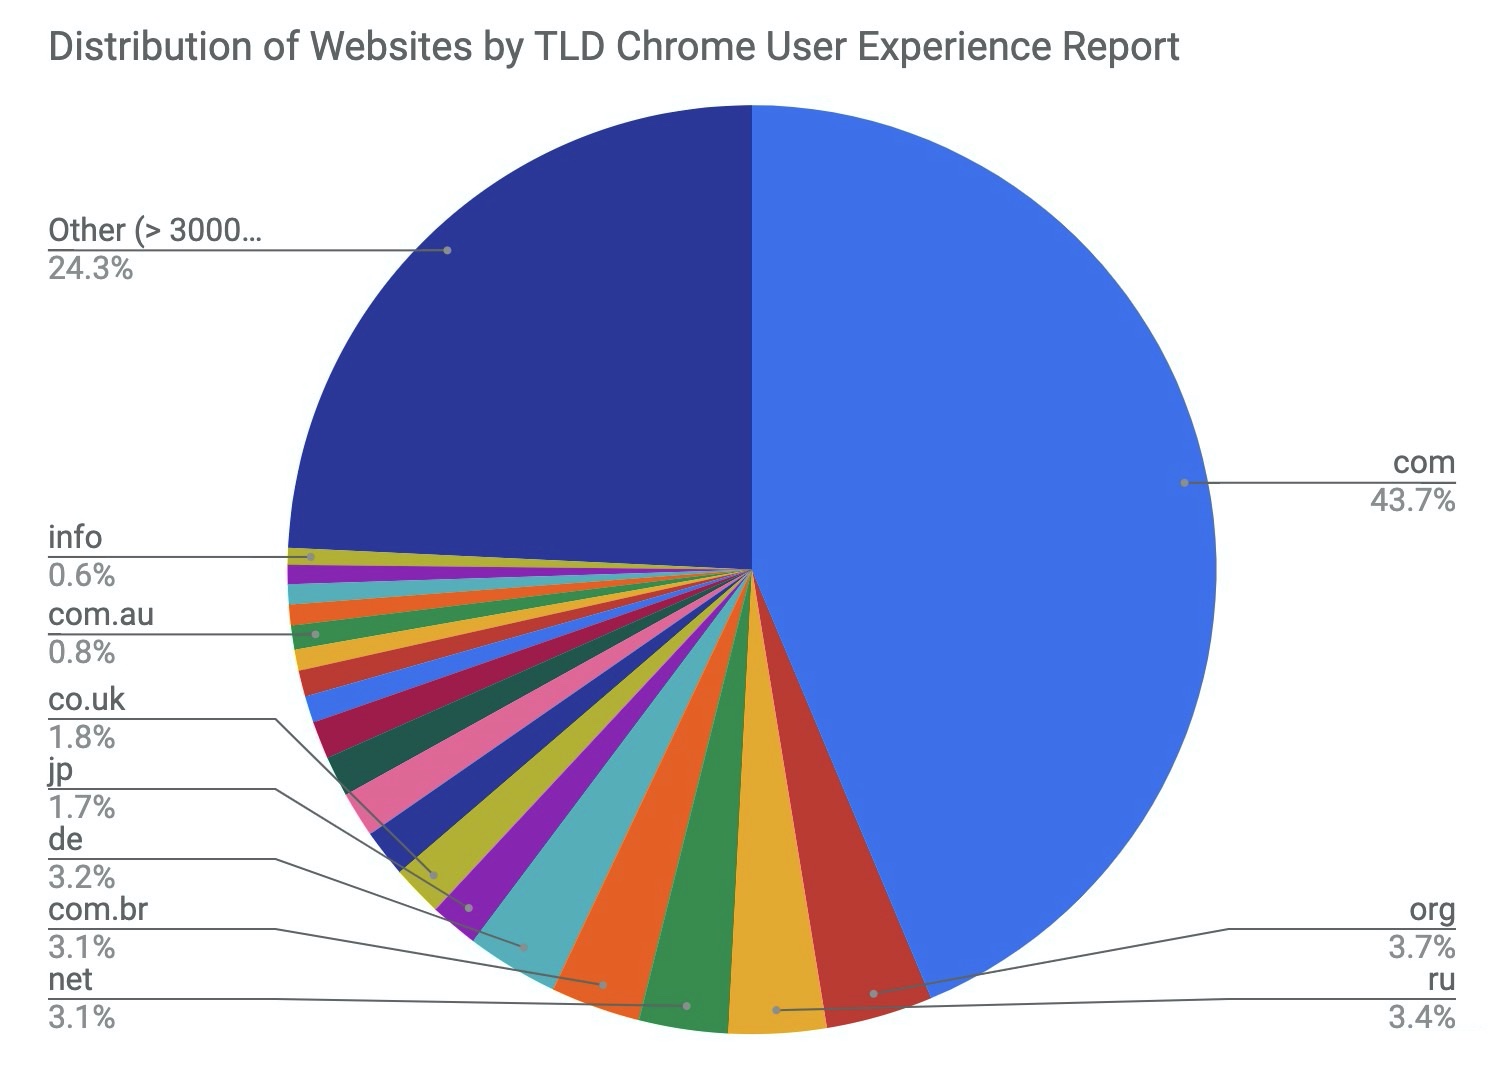 Distribution of Websites by TLD - Chrome User Experience Report